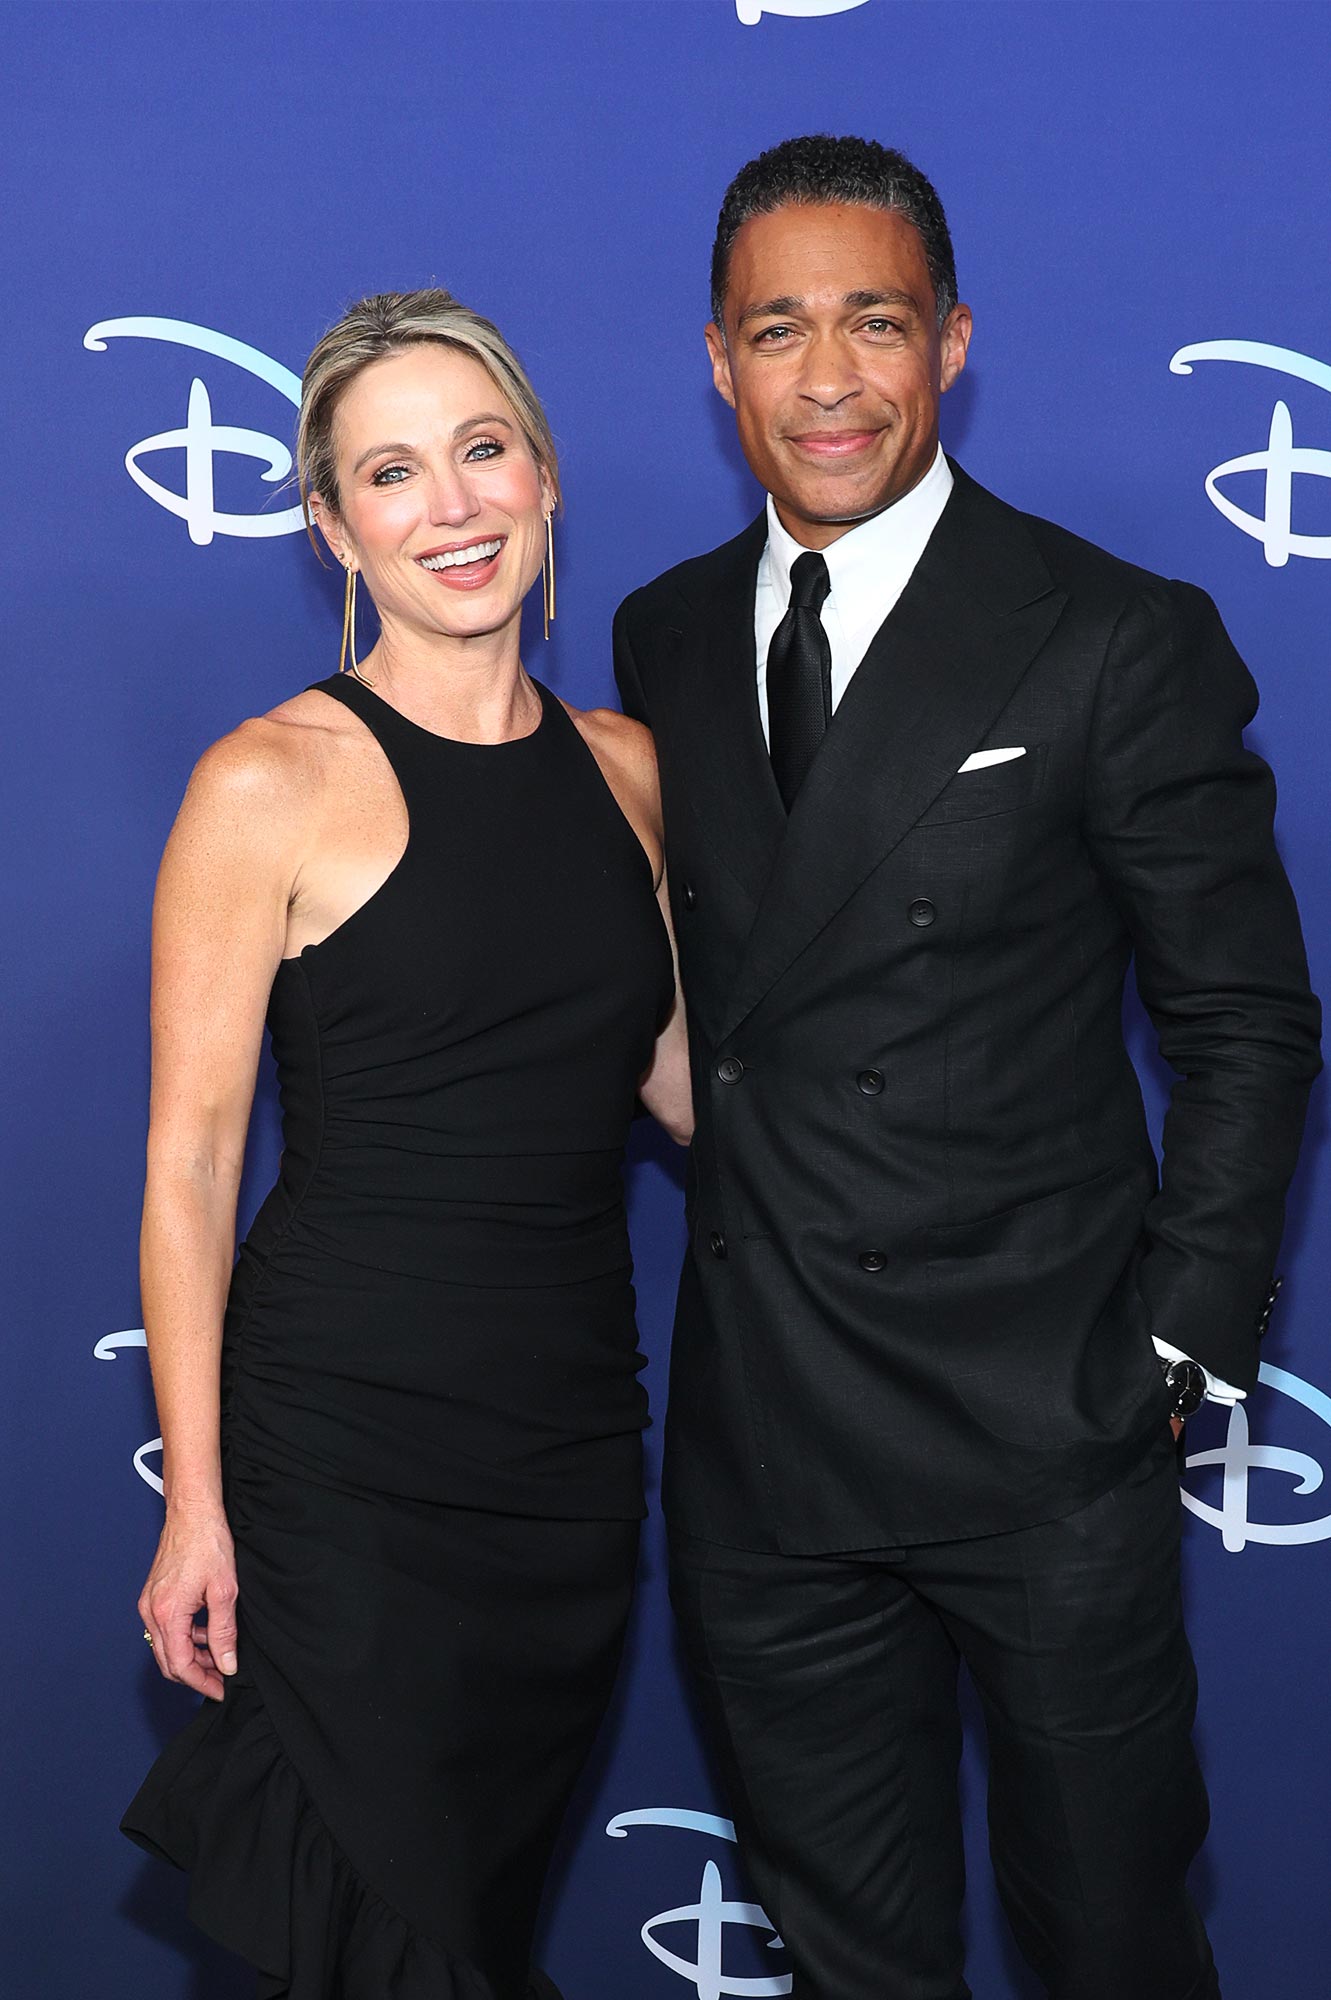 Amy Robach and T.J. Holmes Podcast Will Introduce Them as a Couple See This as a Chance to Explain 198